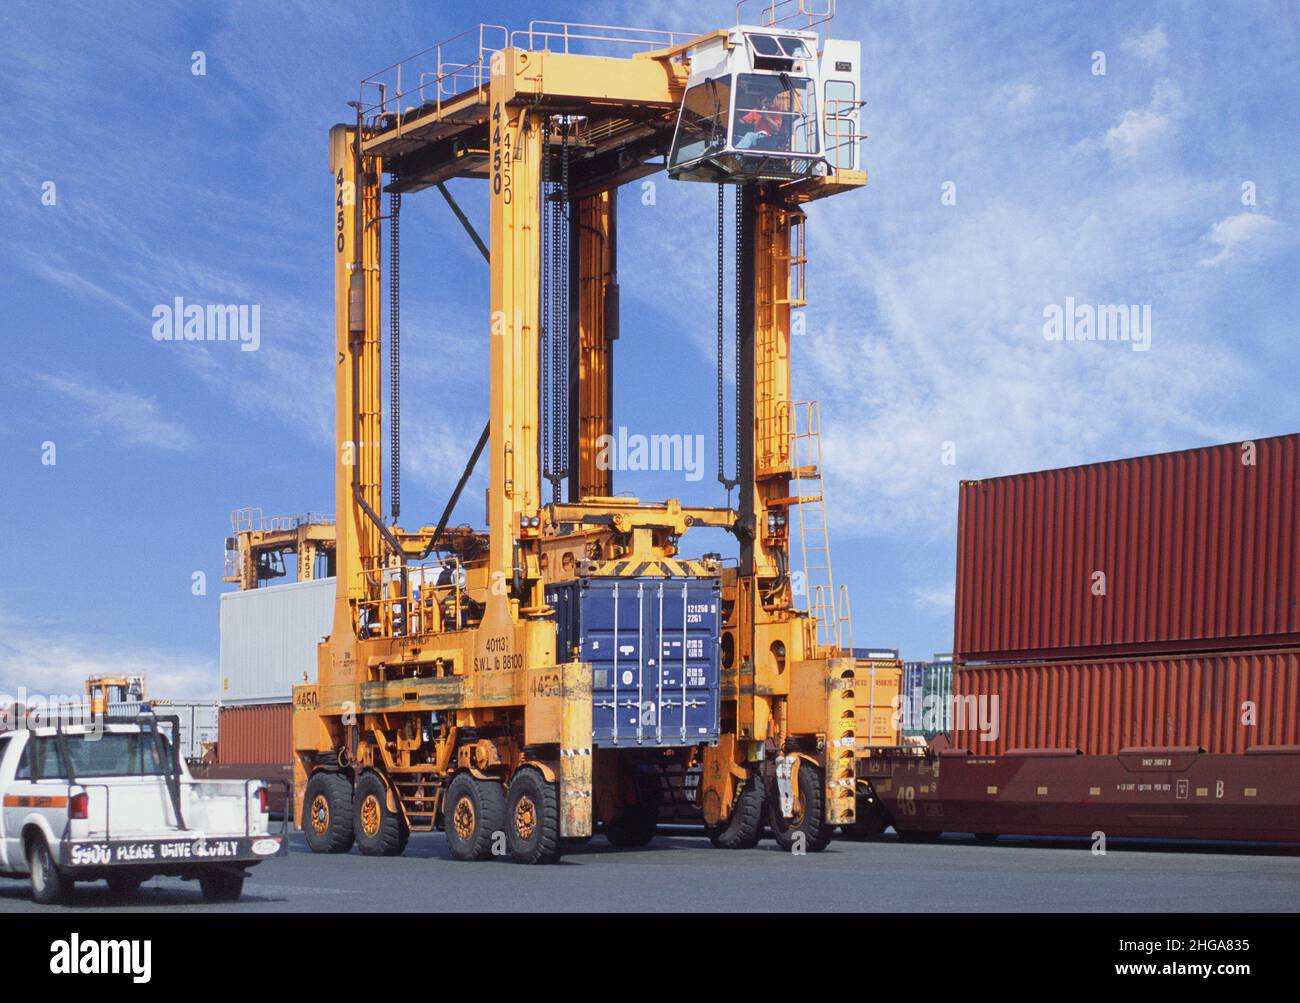 Straddle carrier with container at port pier. Loading freight cargo. Shipping. Dockside industrial seaport. Moving containers shipment on dock. USA Stock Photo